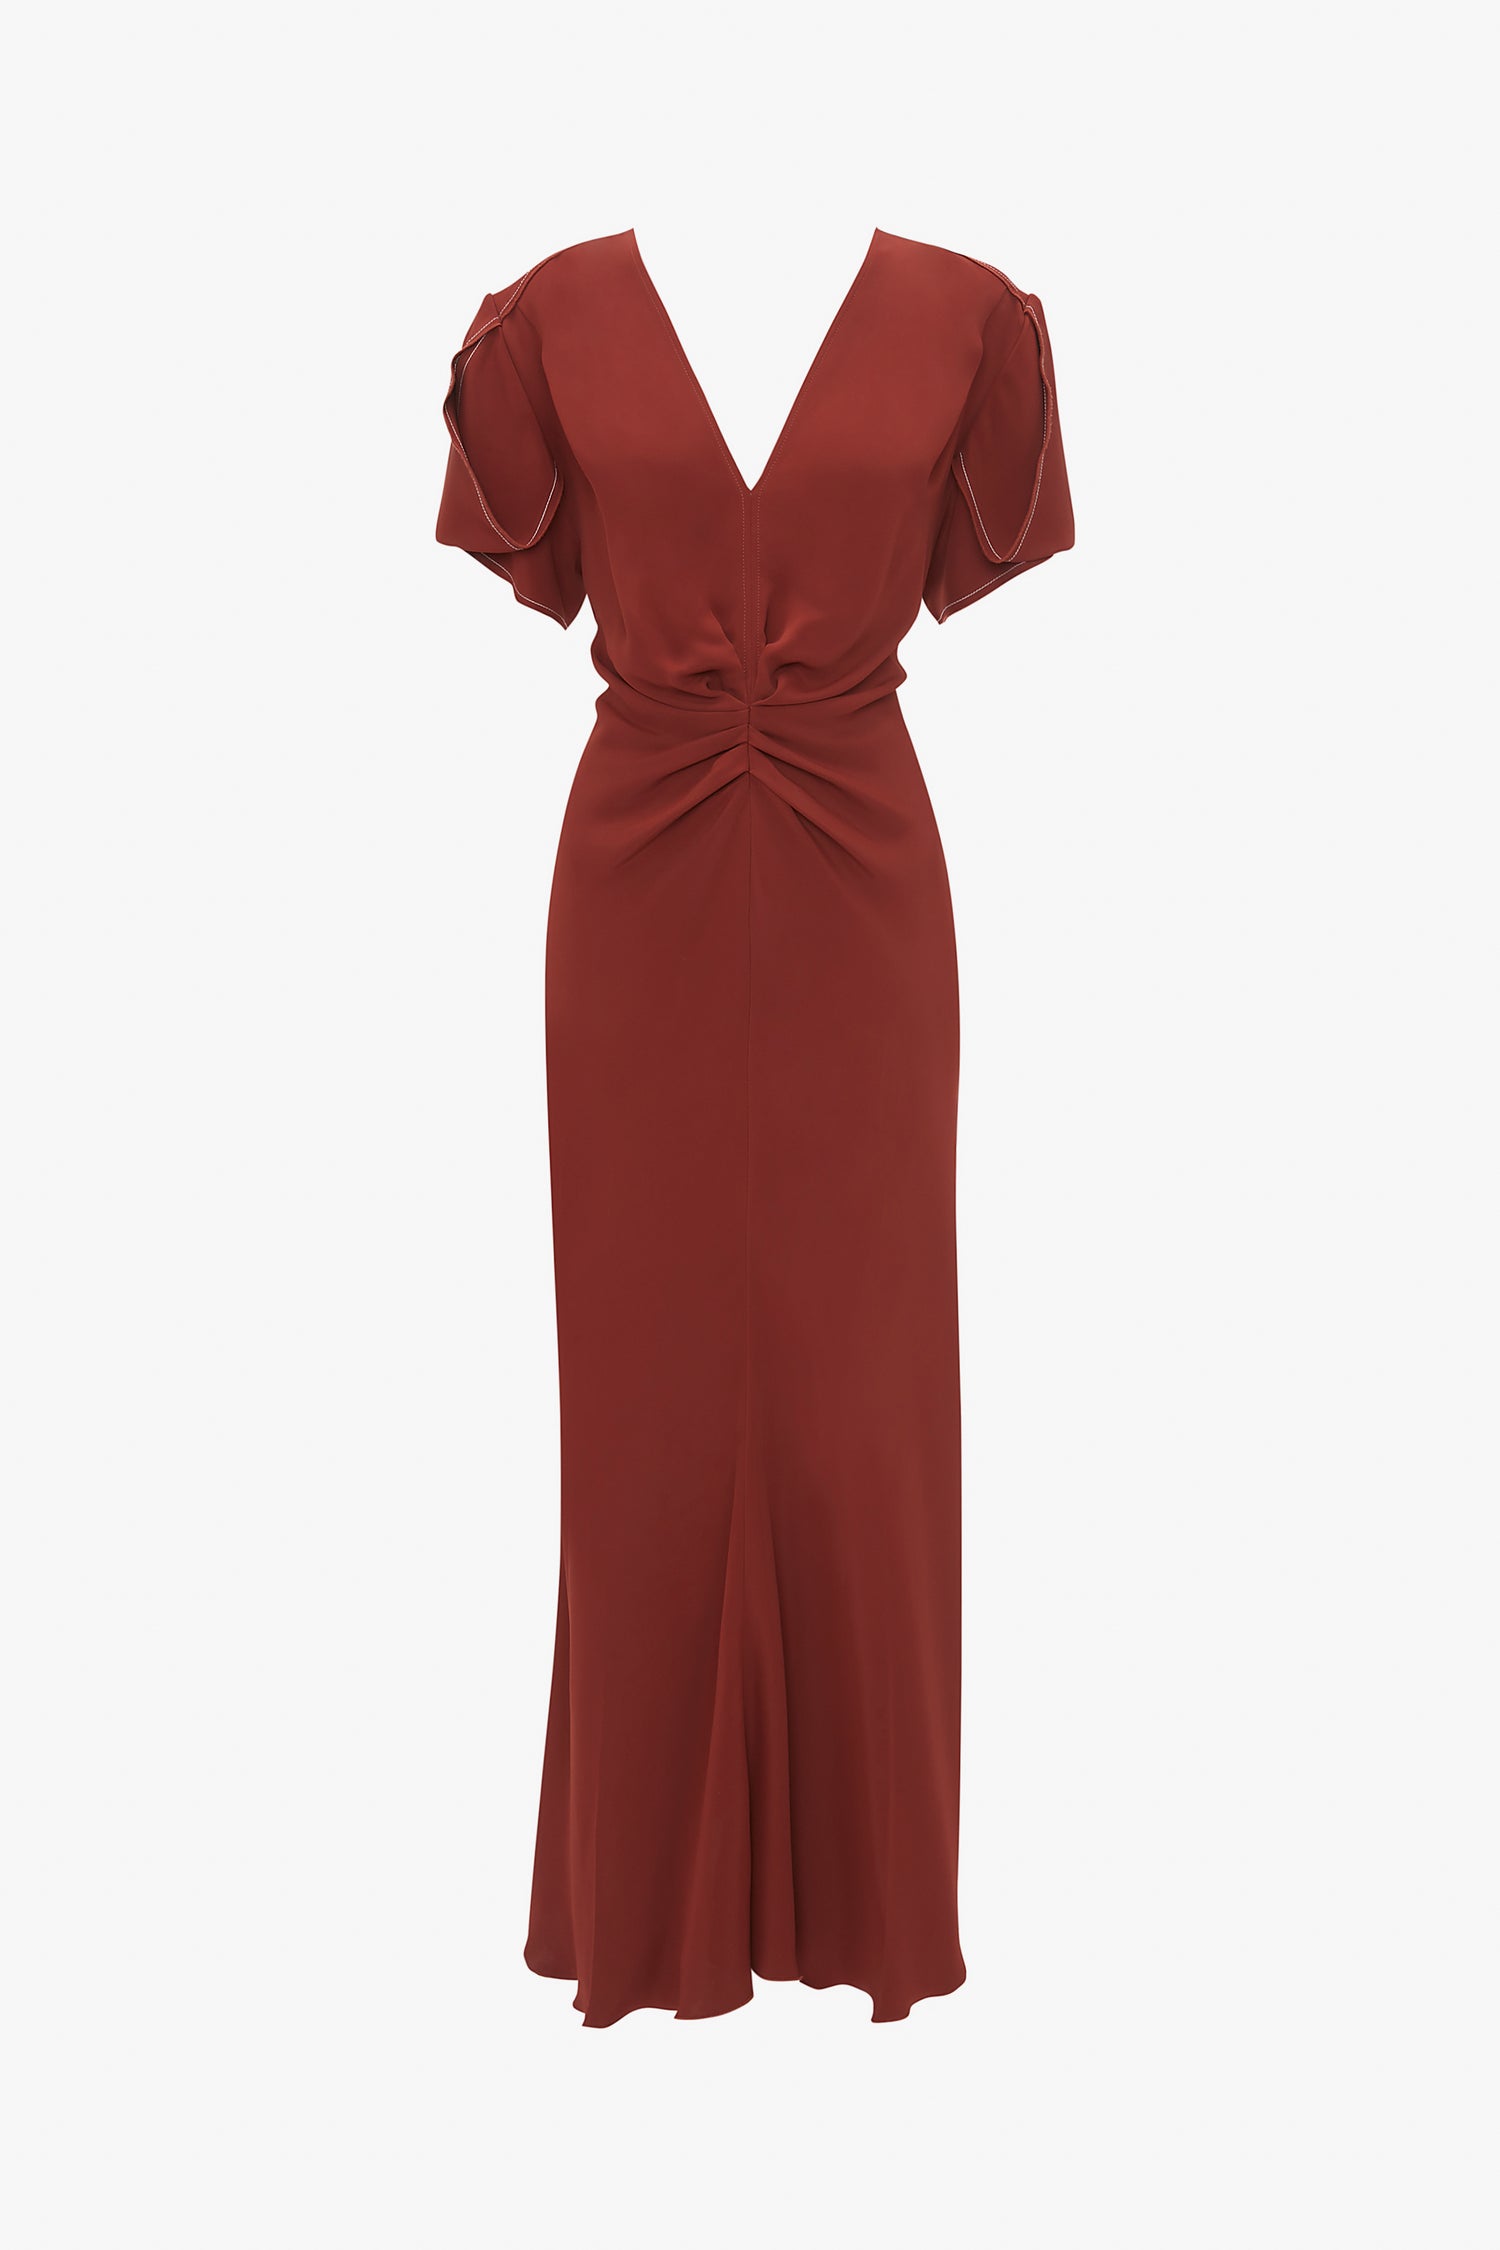 The Victoria Beckham Gathered V-Neck Midi Dress In Russet features short sleeves and a waist-defining pleat detail, crafted from figure-flattering stretch fabric.